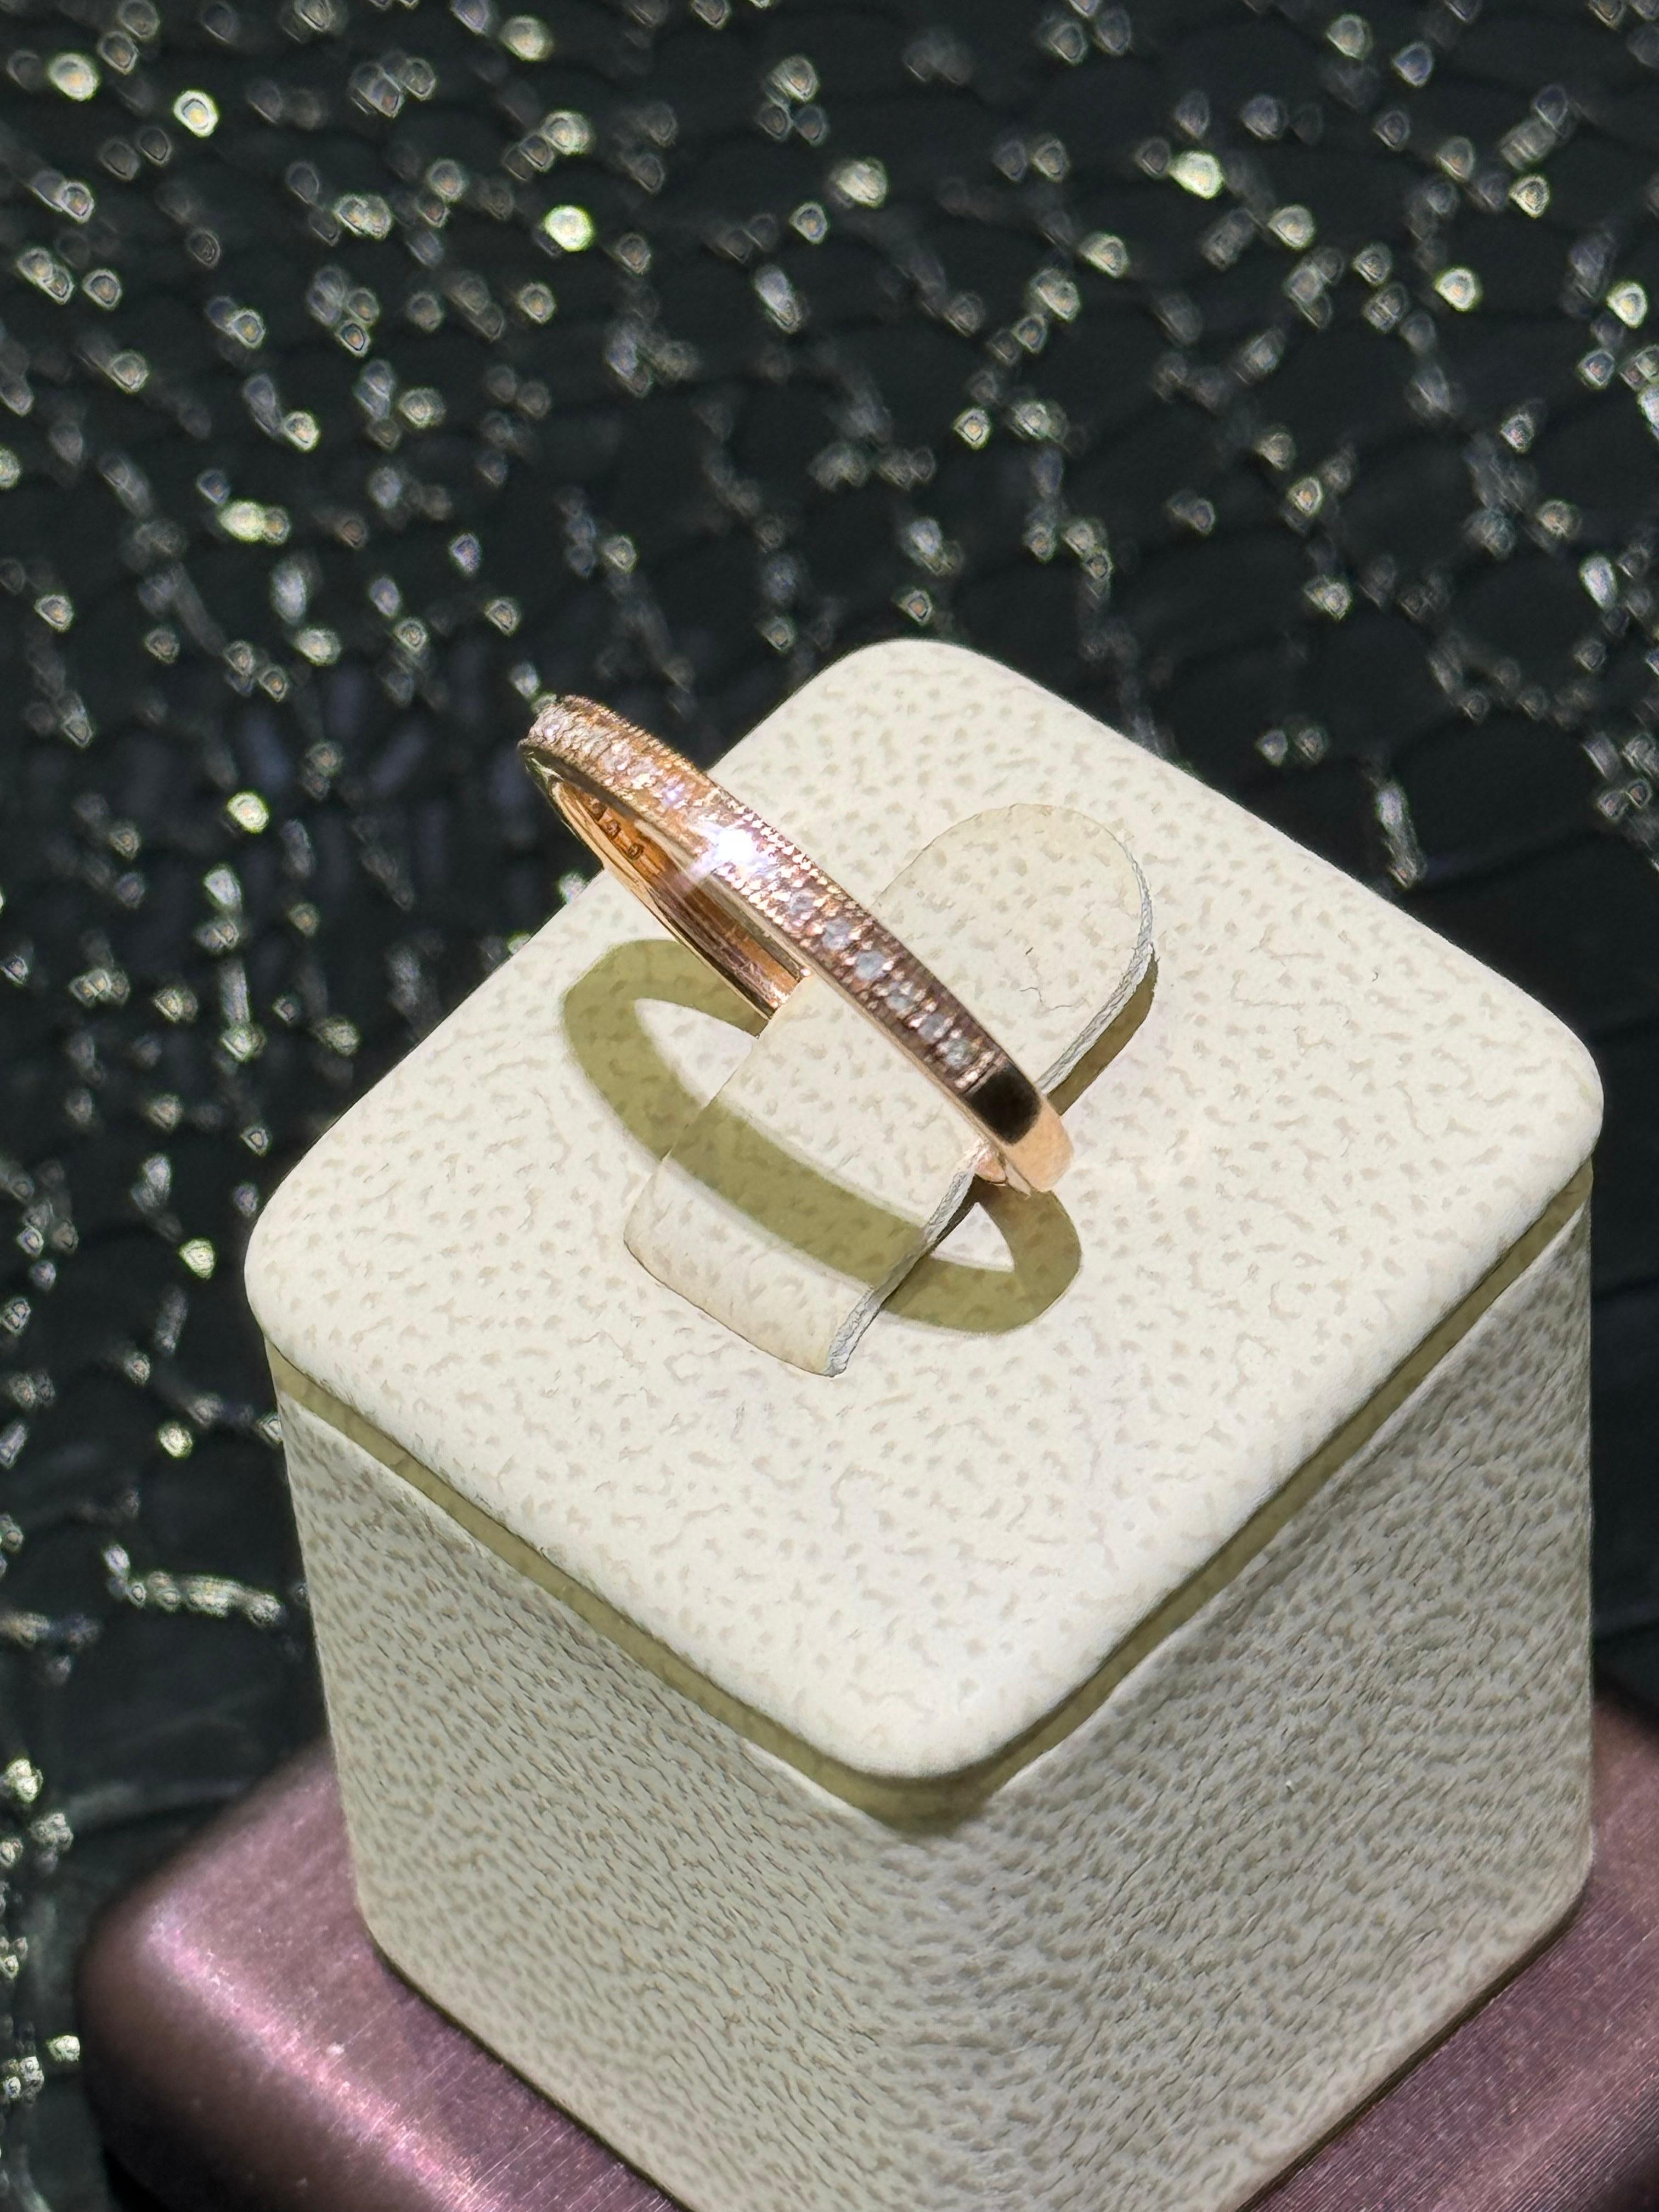 Effy Diamond Ring In 14k Rose Gold .

Approximately 0.25 carats in diamonds.

Size 6.75.

Shank width is 2mm.